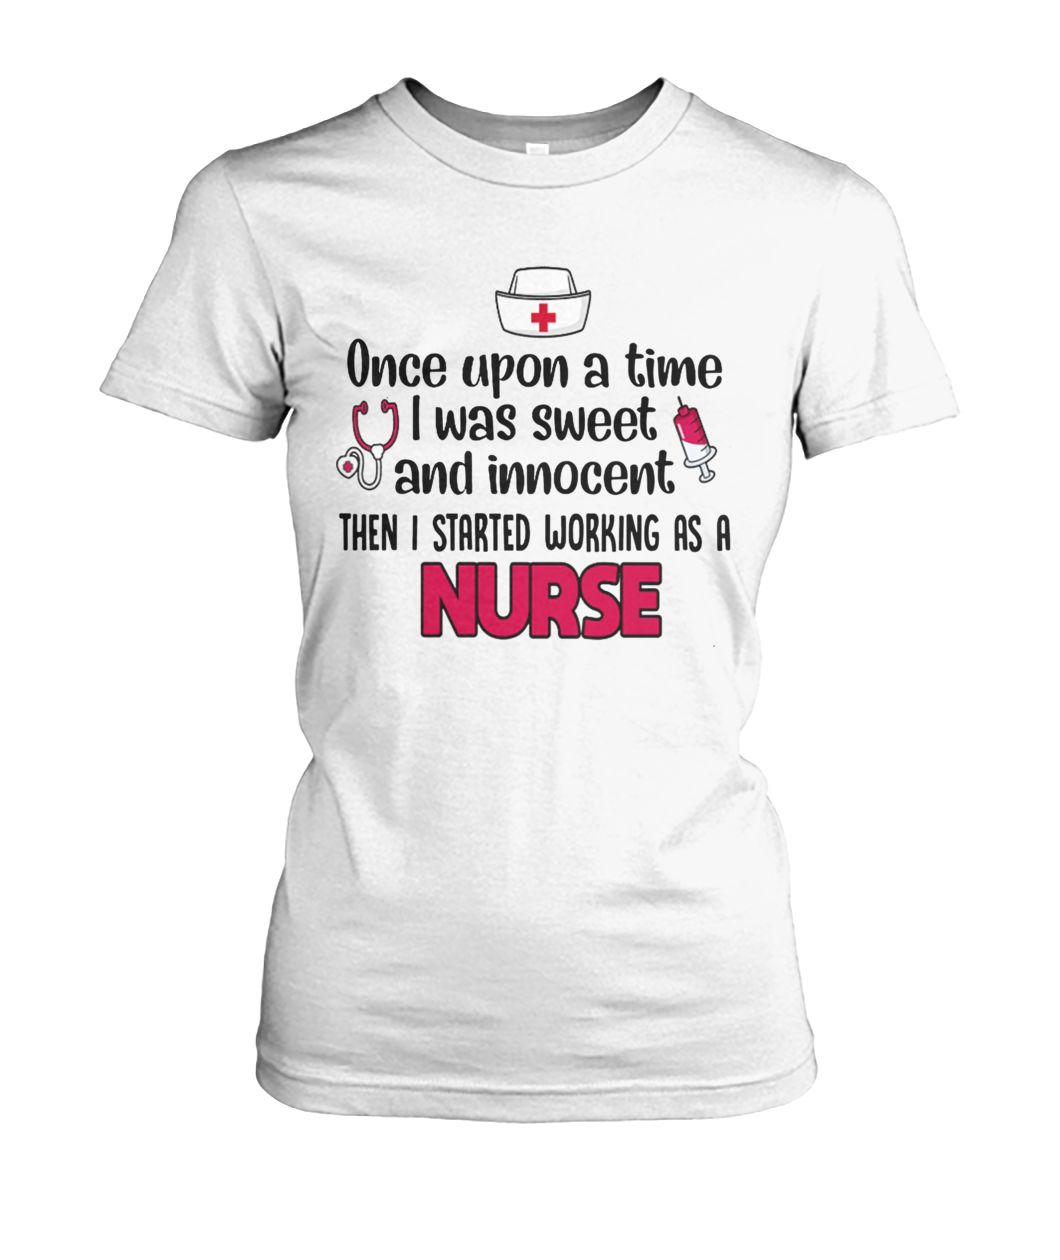 Once upon a time I was sweet and innocent then I started working as a nurse women's crew tee